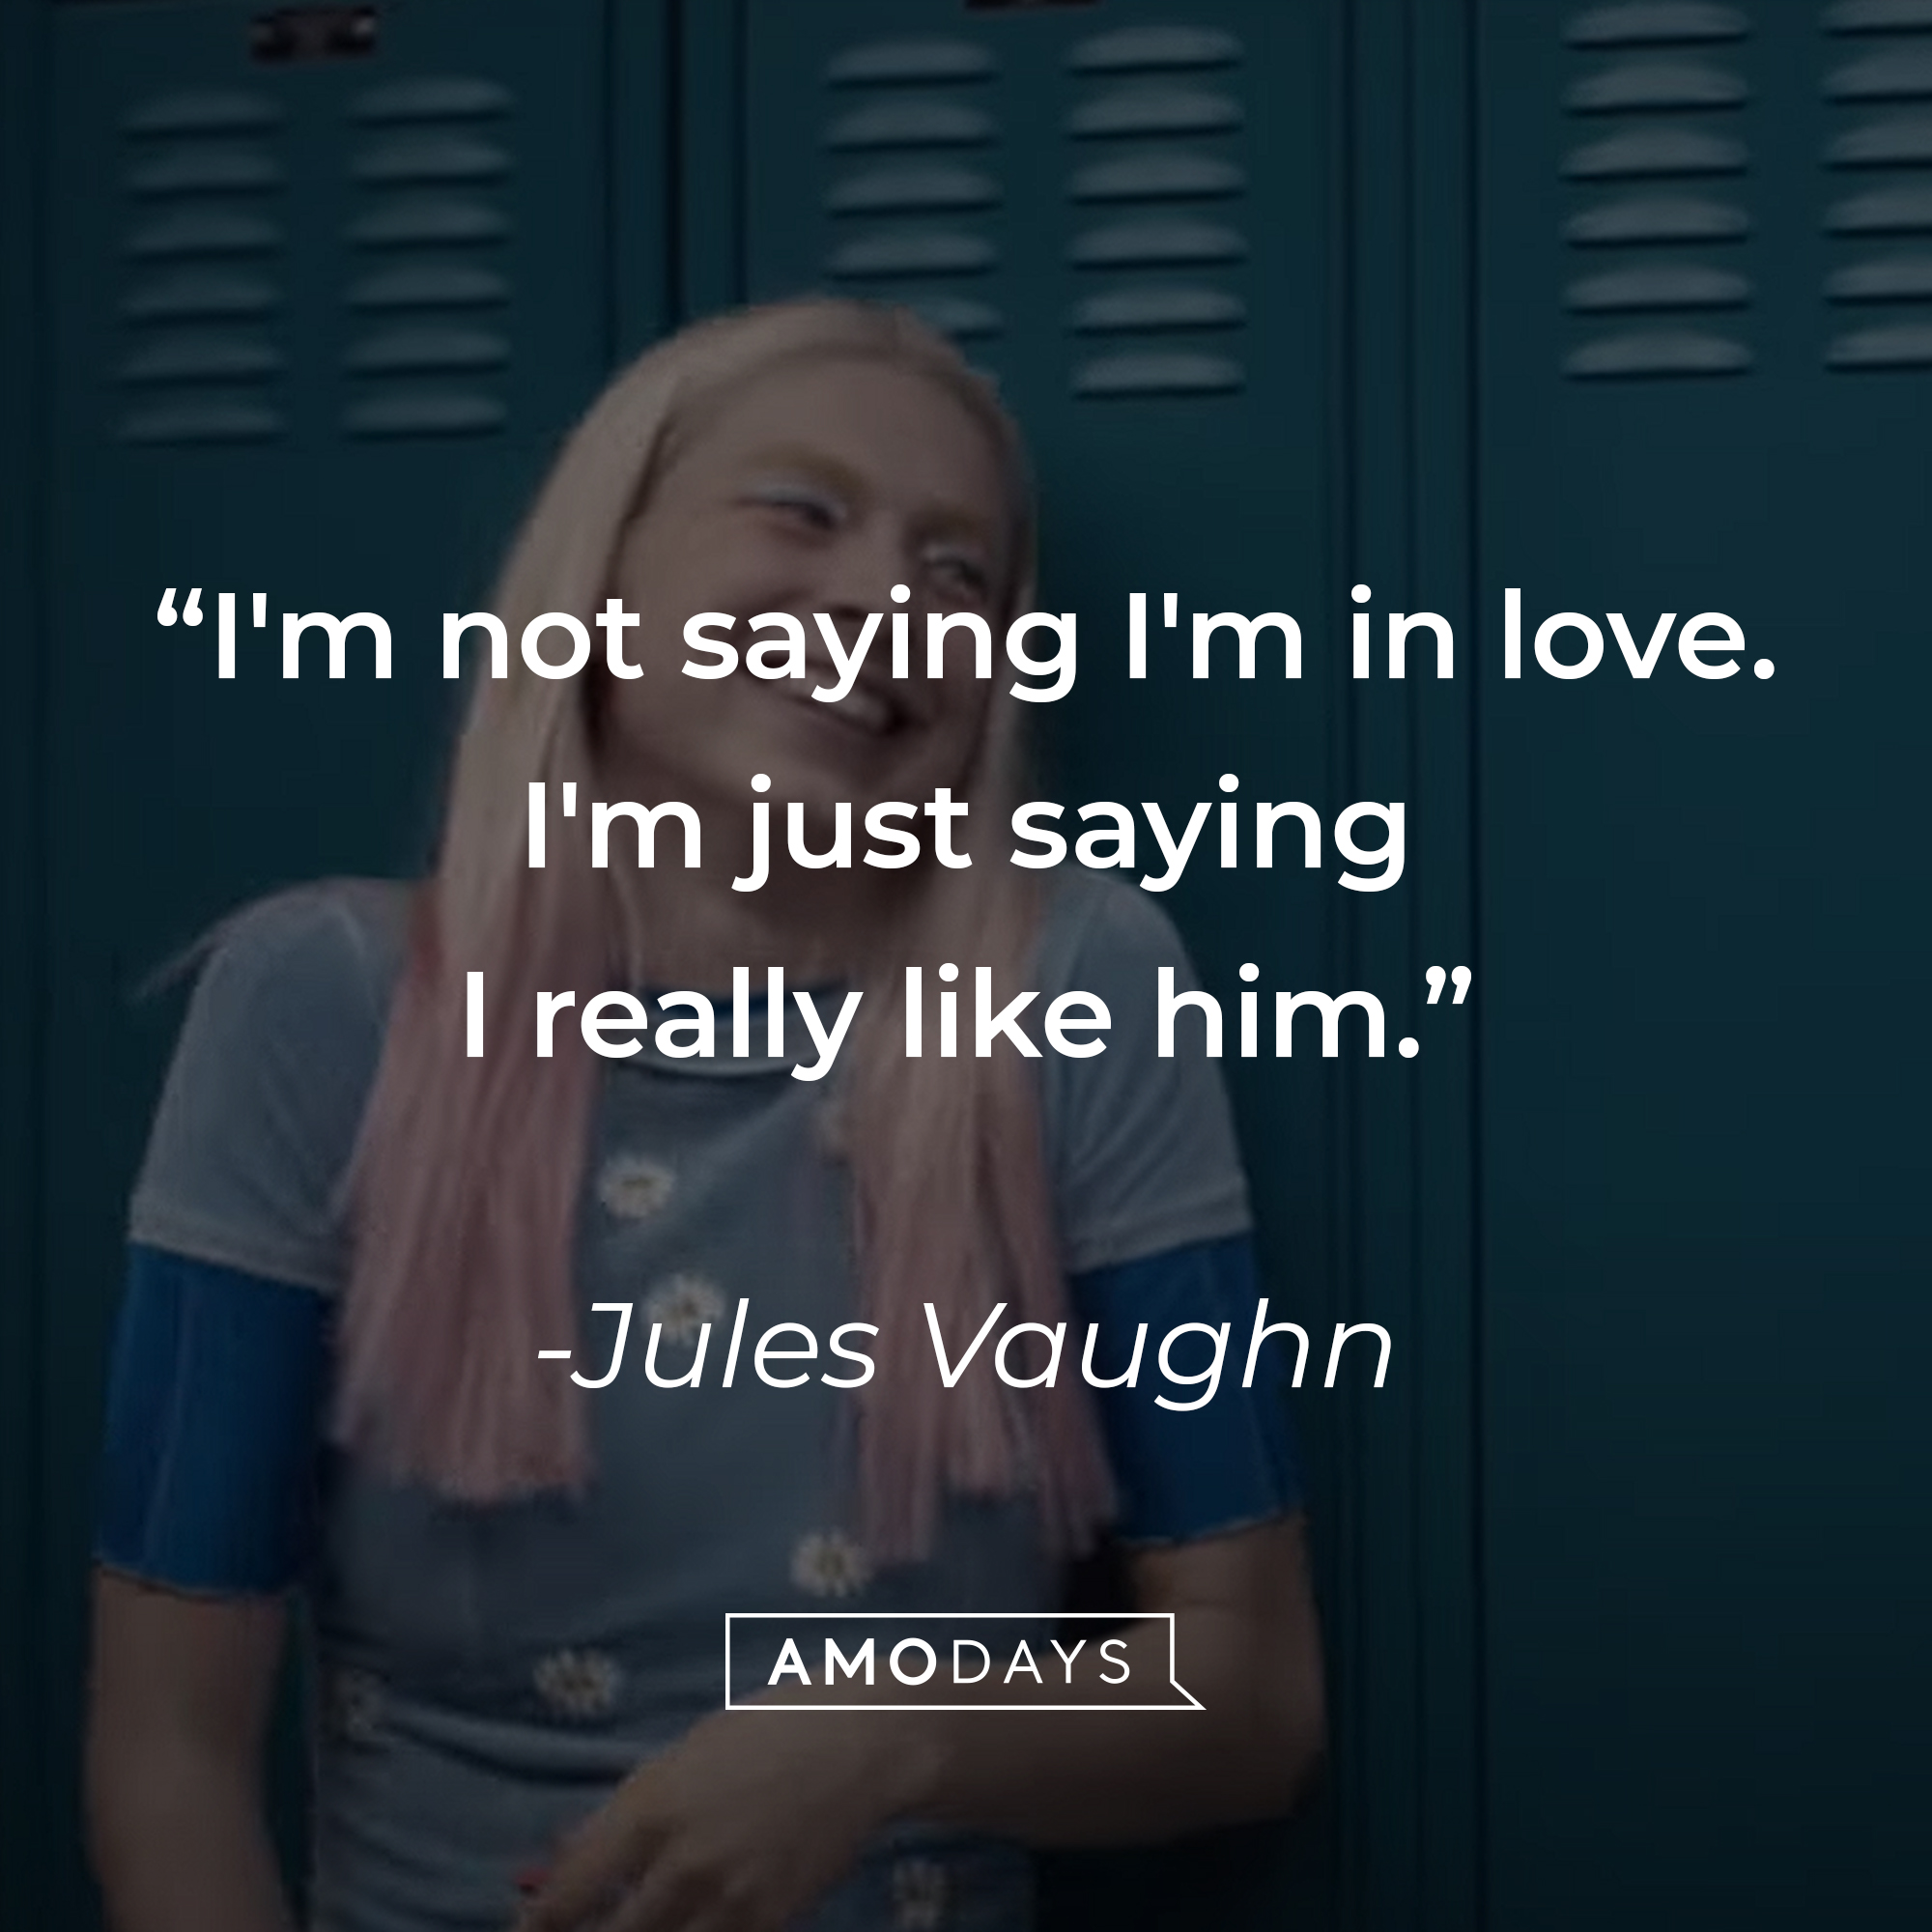 Jules Vaughn with her quote: "I'm not saying I'm in love. I'm just saying I really like him." | Source: HBO